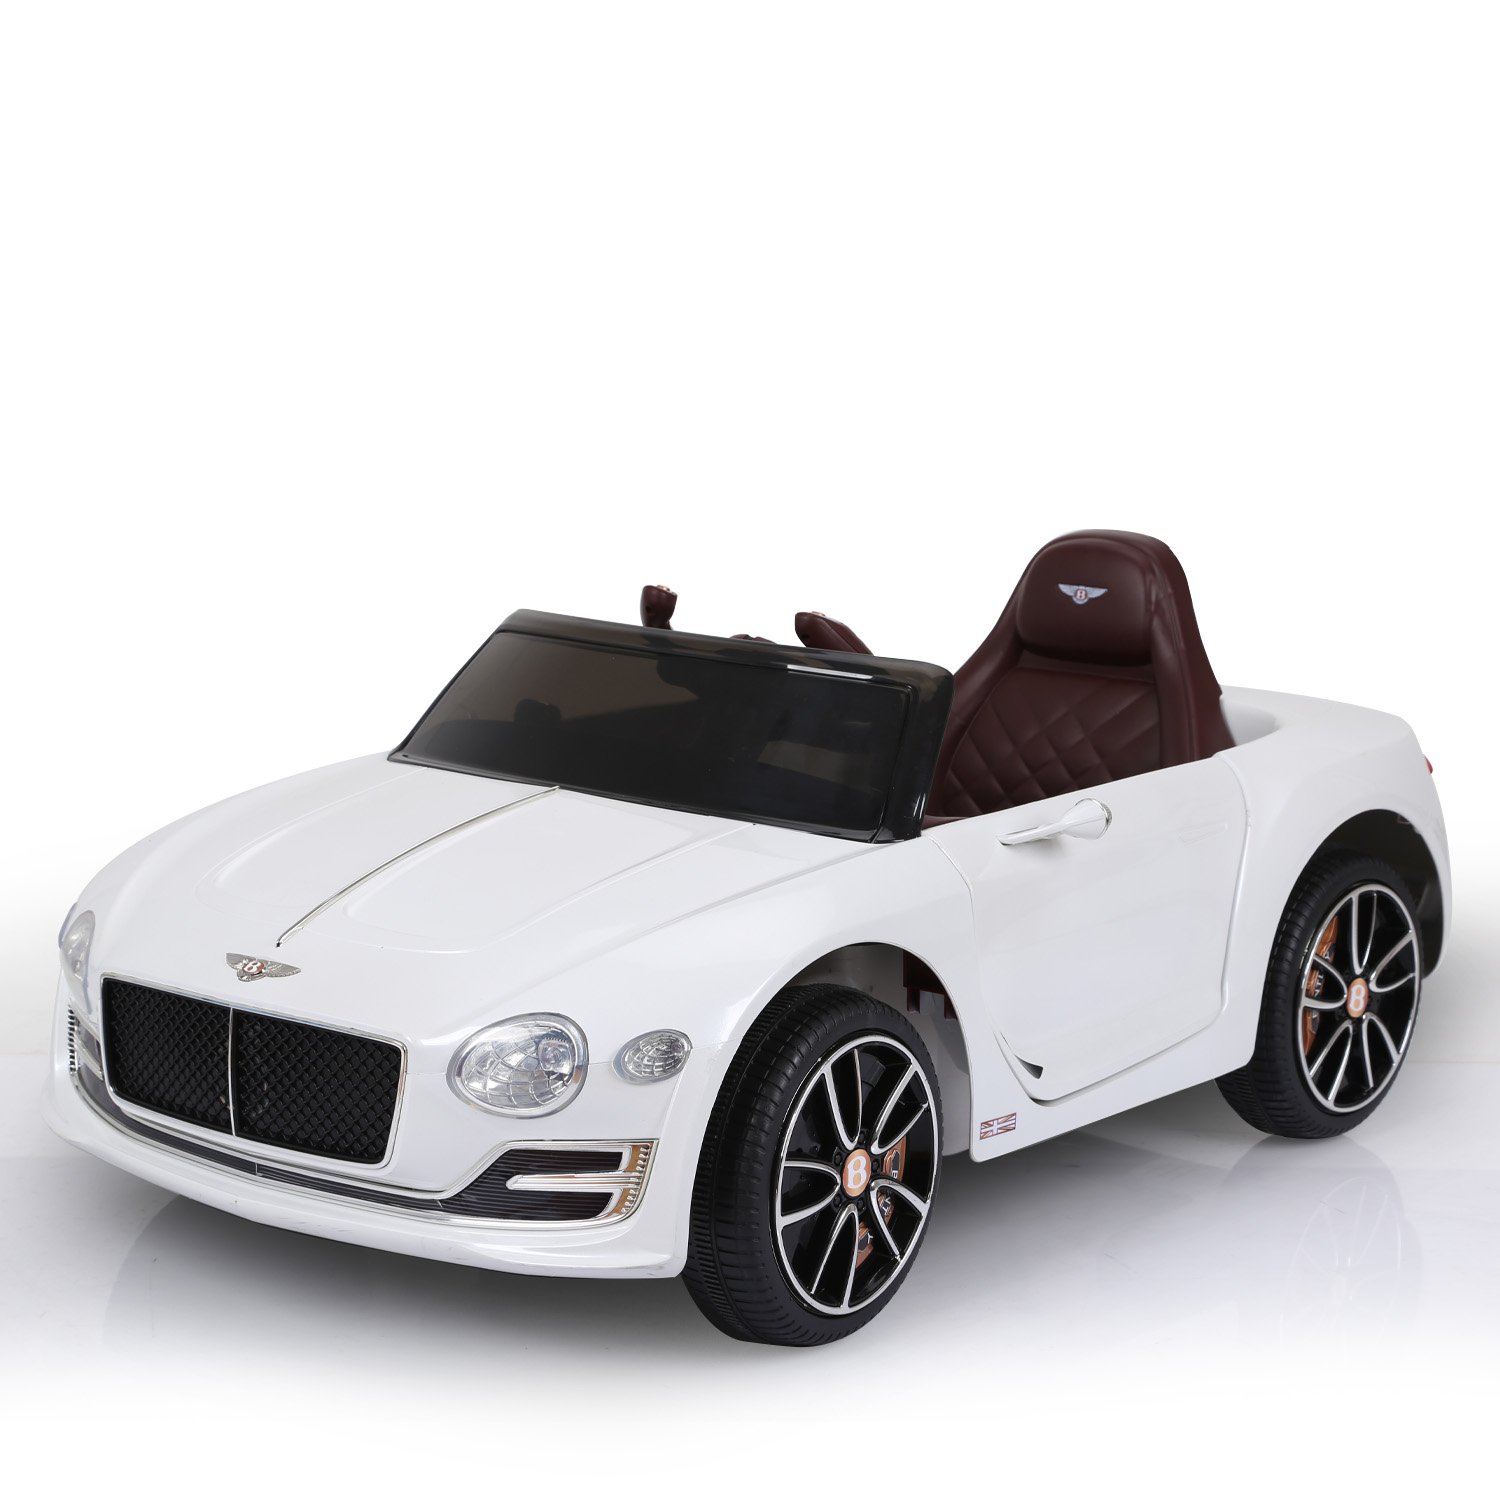 Bentley Exp 12 Speed 6E Licensed Kids Ride On Electric Car Remote Control - White 2